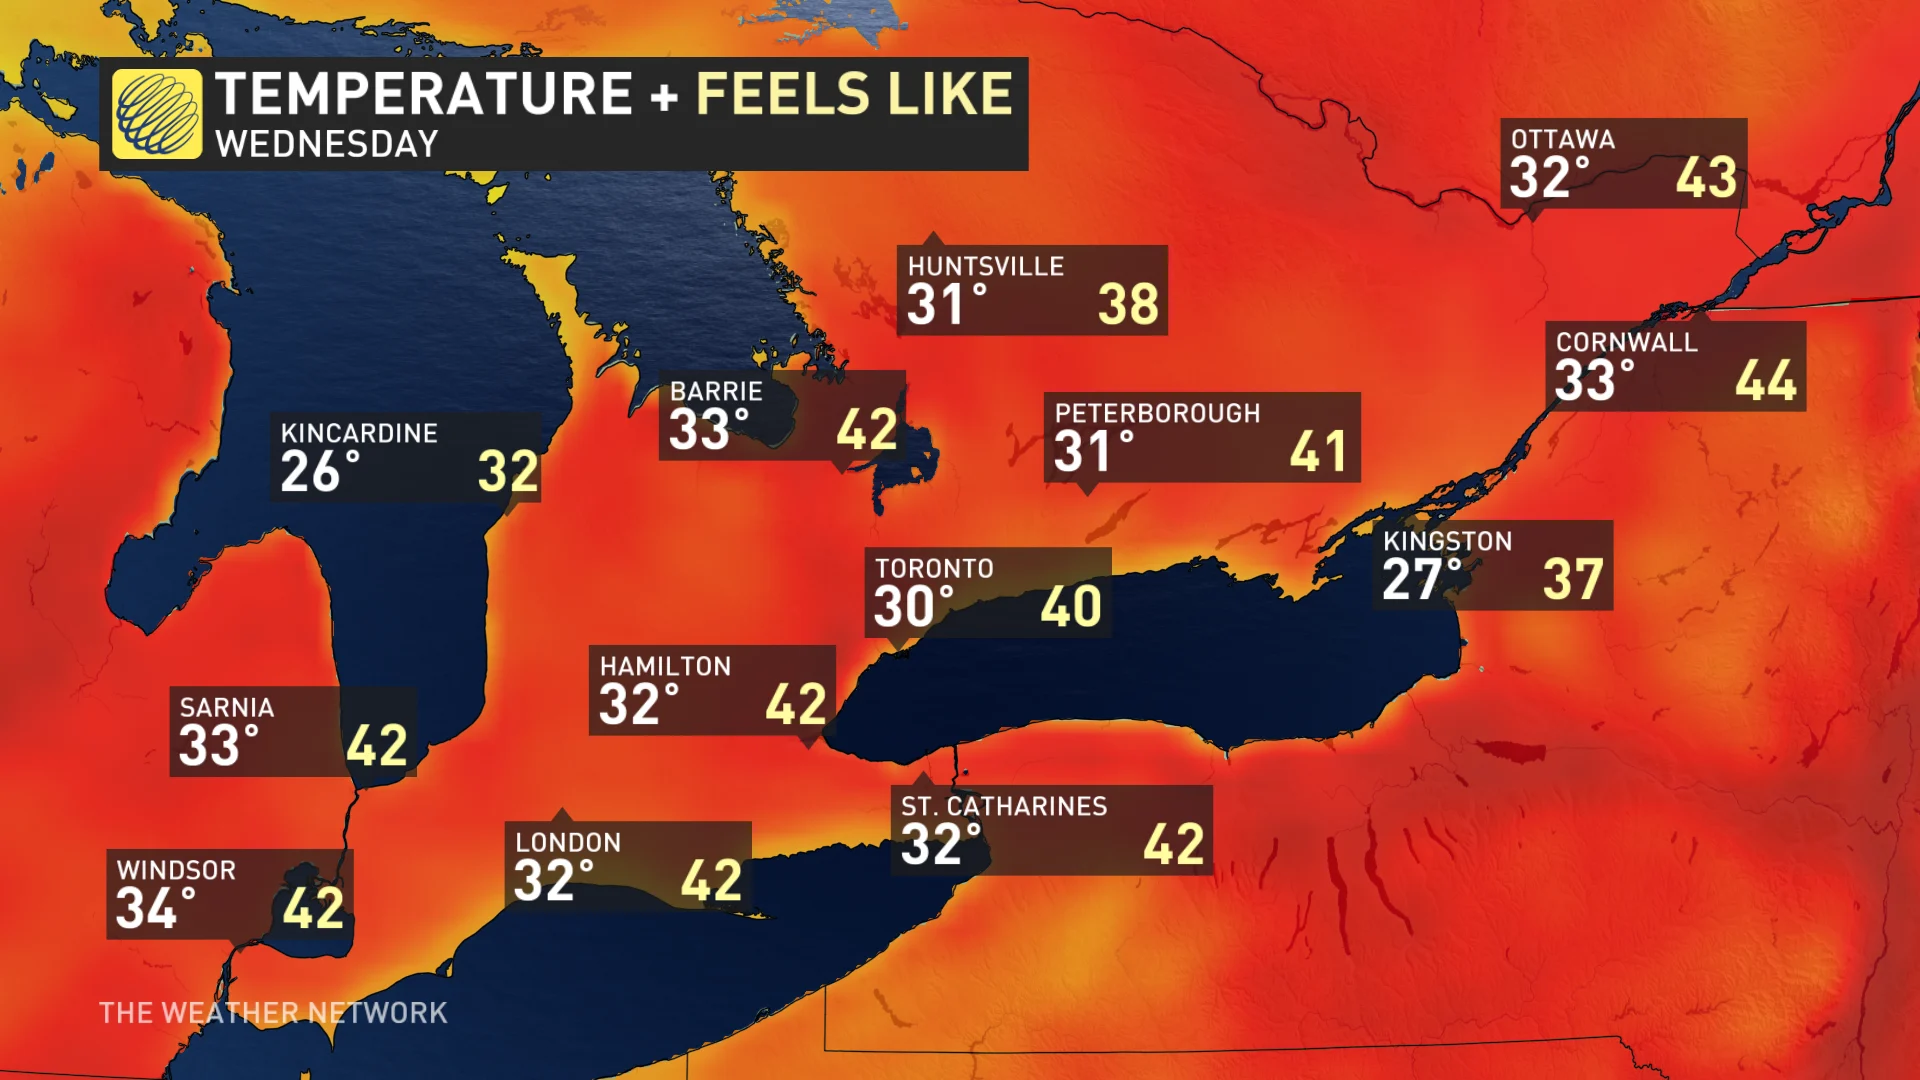 Wednesday southern Ontario and Quebec temperatures and feels like_June 18